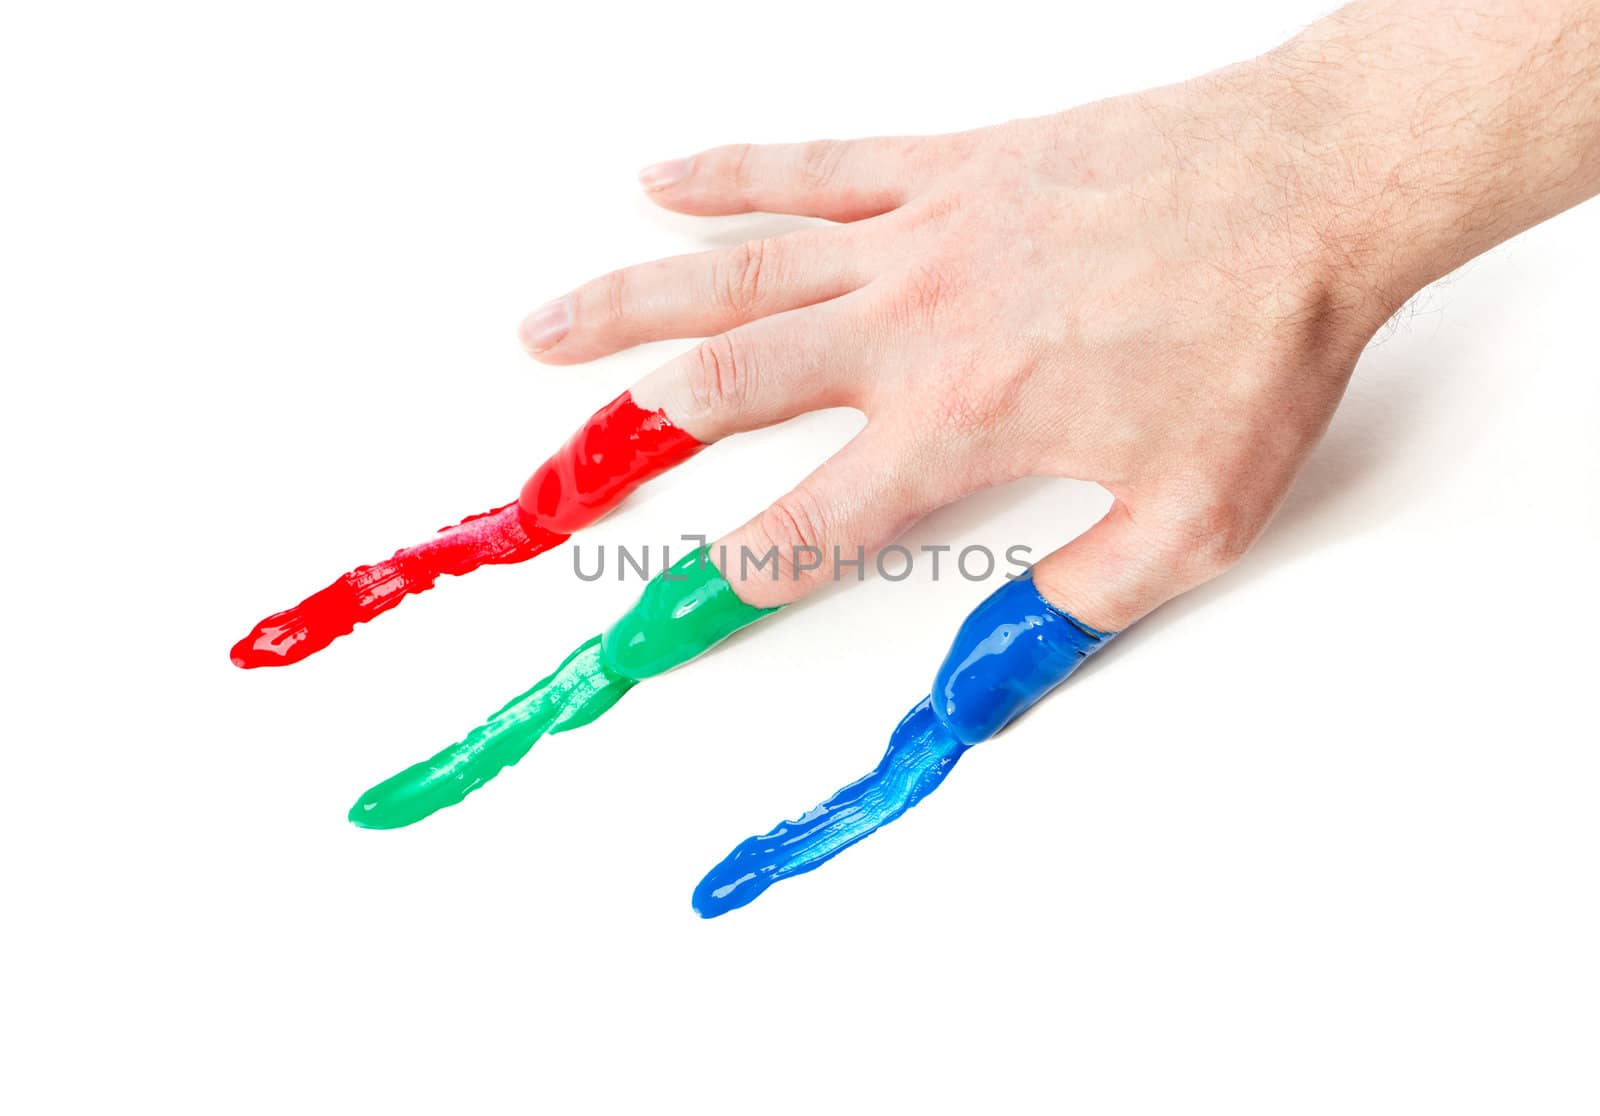 Fingers with fingerpaints in three primary colors, Red, green and blue.